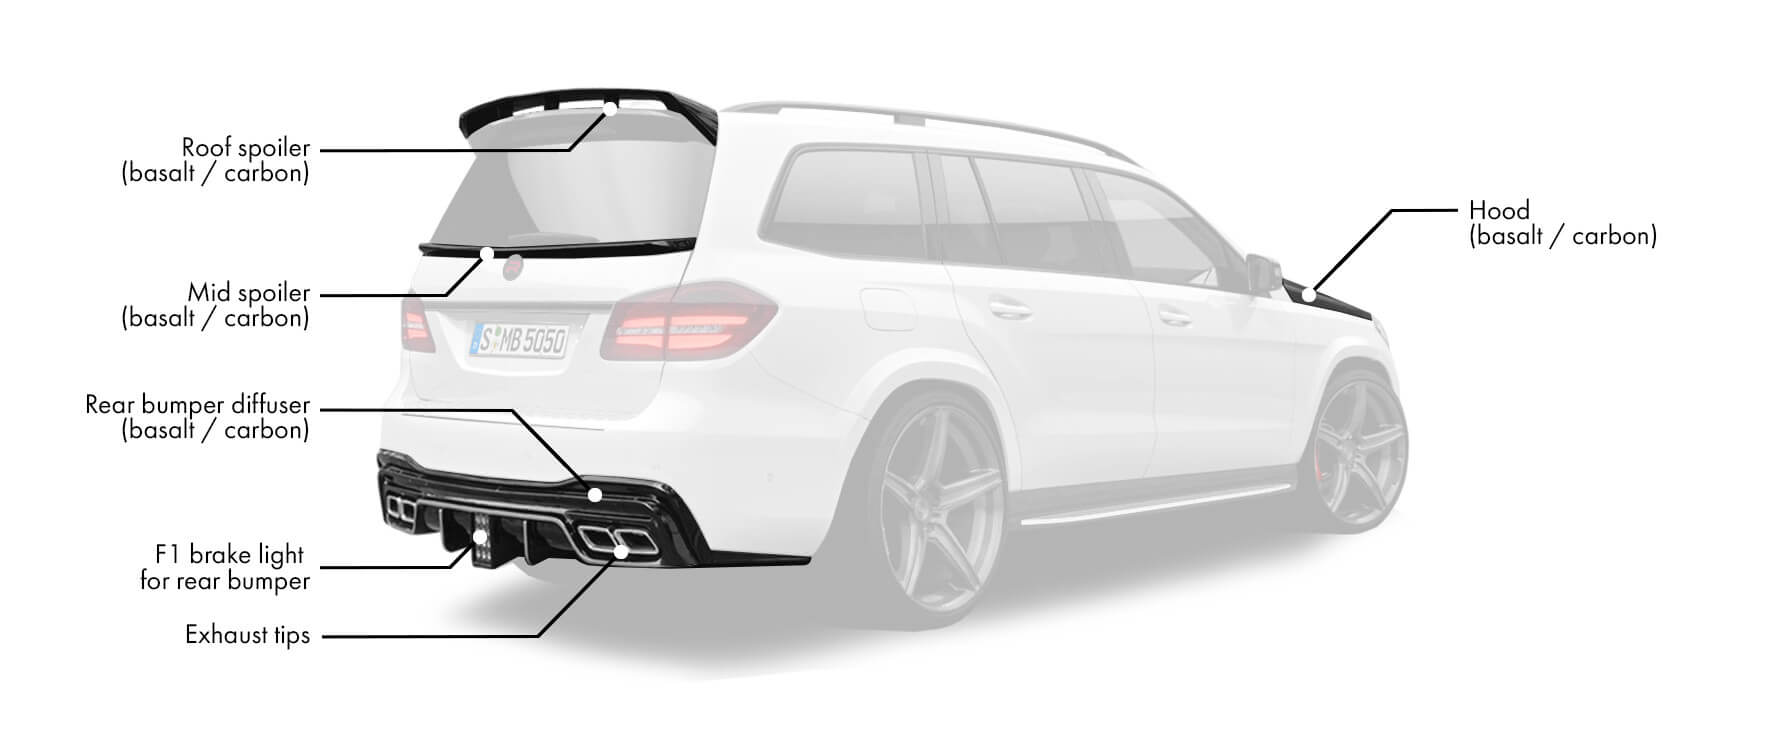 Check our price and buy Renegade Design body kit for  Mercedes Benz GLS X166